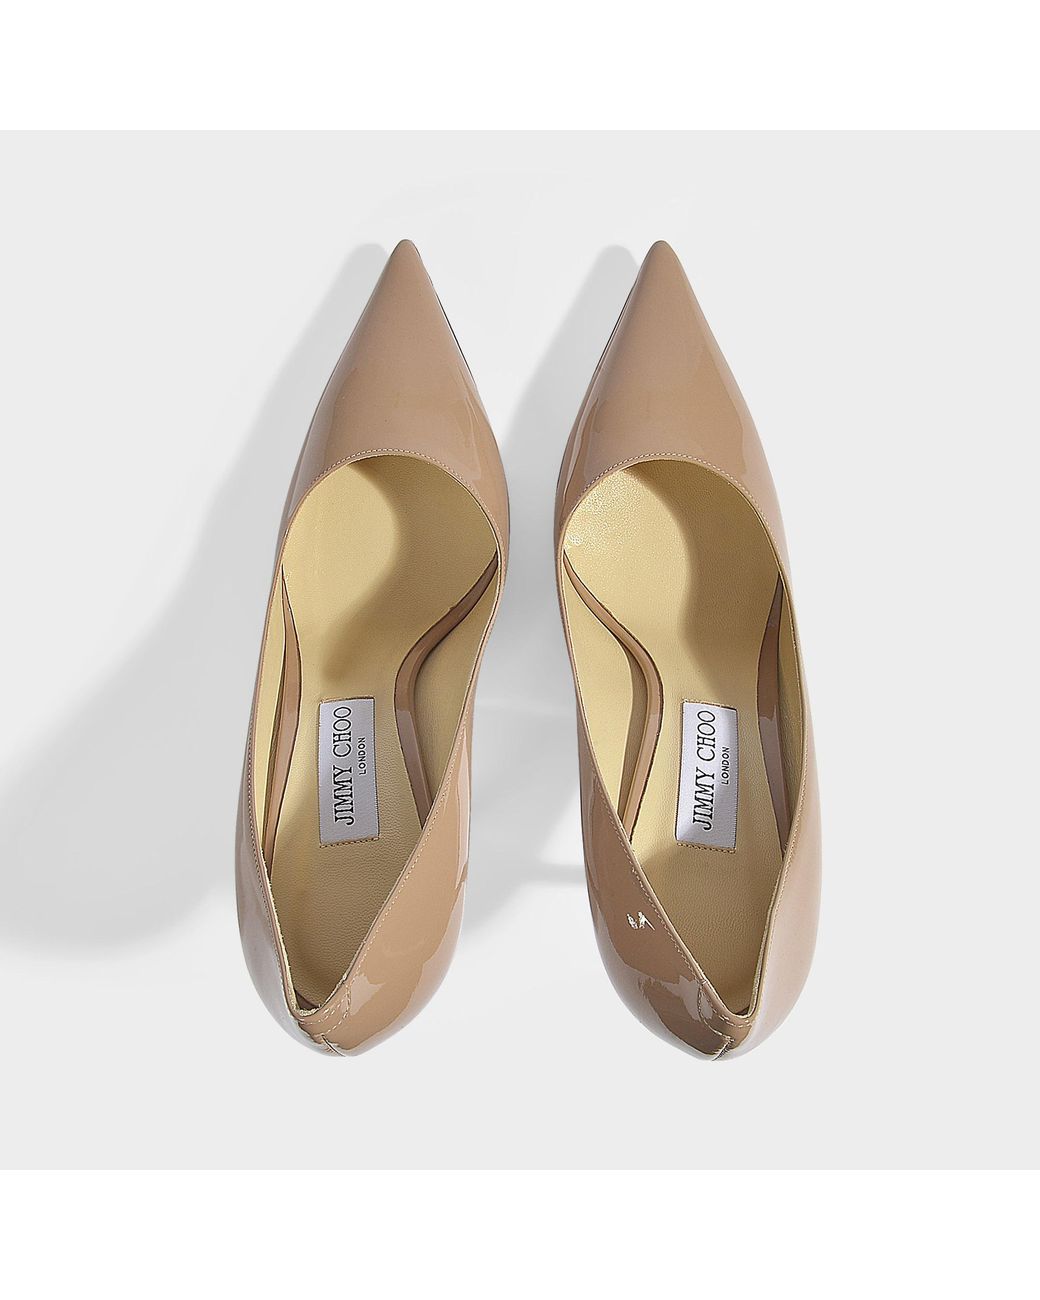 Jimmy Choo Love 85 Patent Pointed Pumps In Ballet Pink Patent